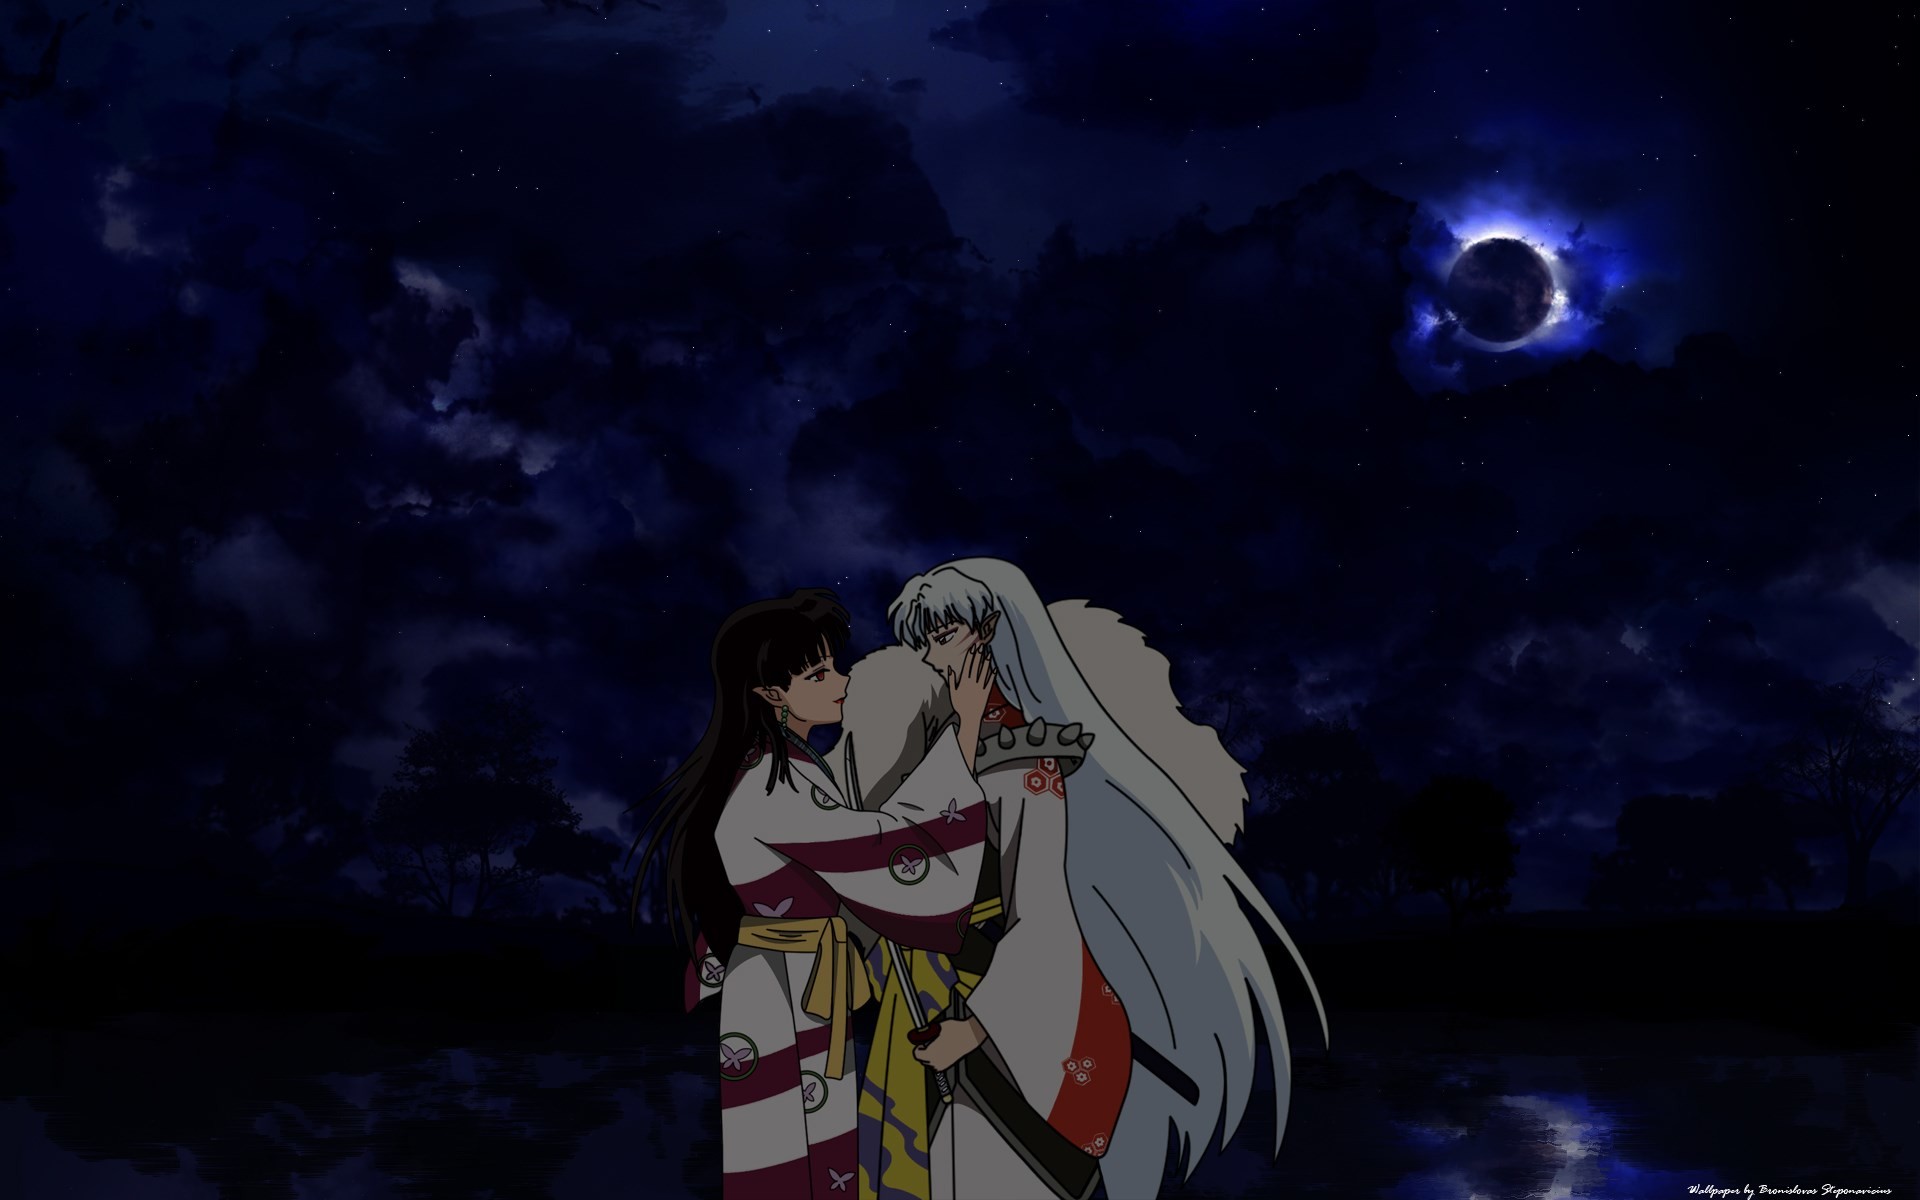 1920x1200 Backgrounds High Resolution: inuyasha wallpaper by Buckley WilKinson  (2017-03-13)